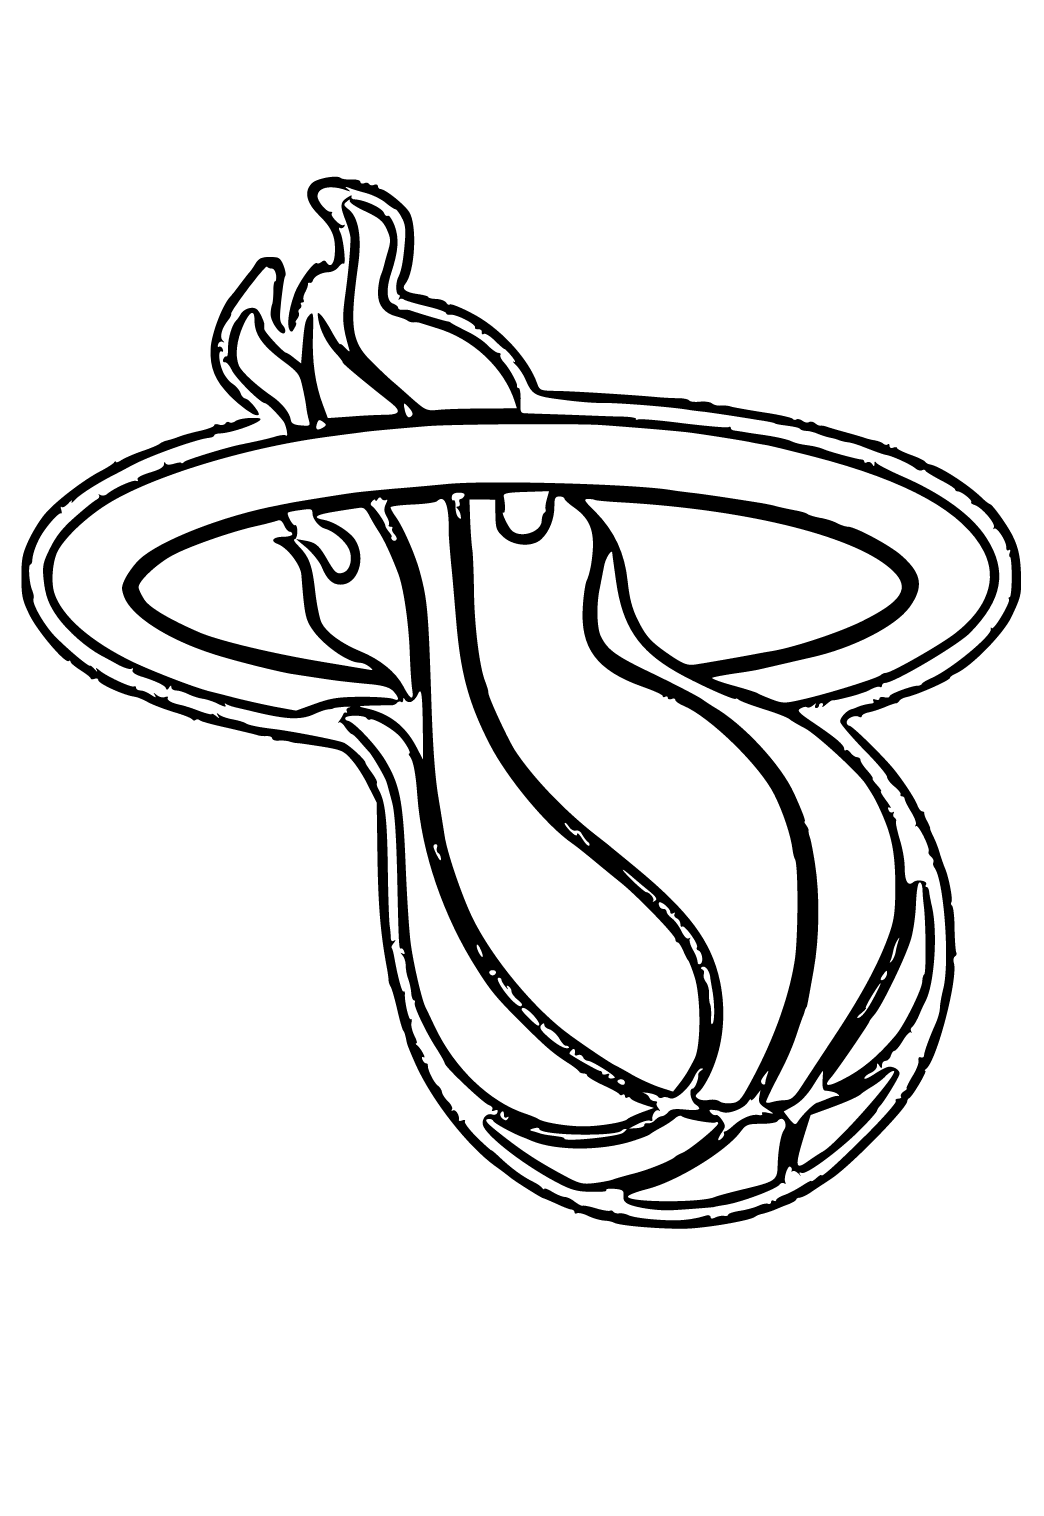 Free printable nba ball coloring page for adults and kids